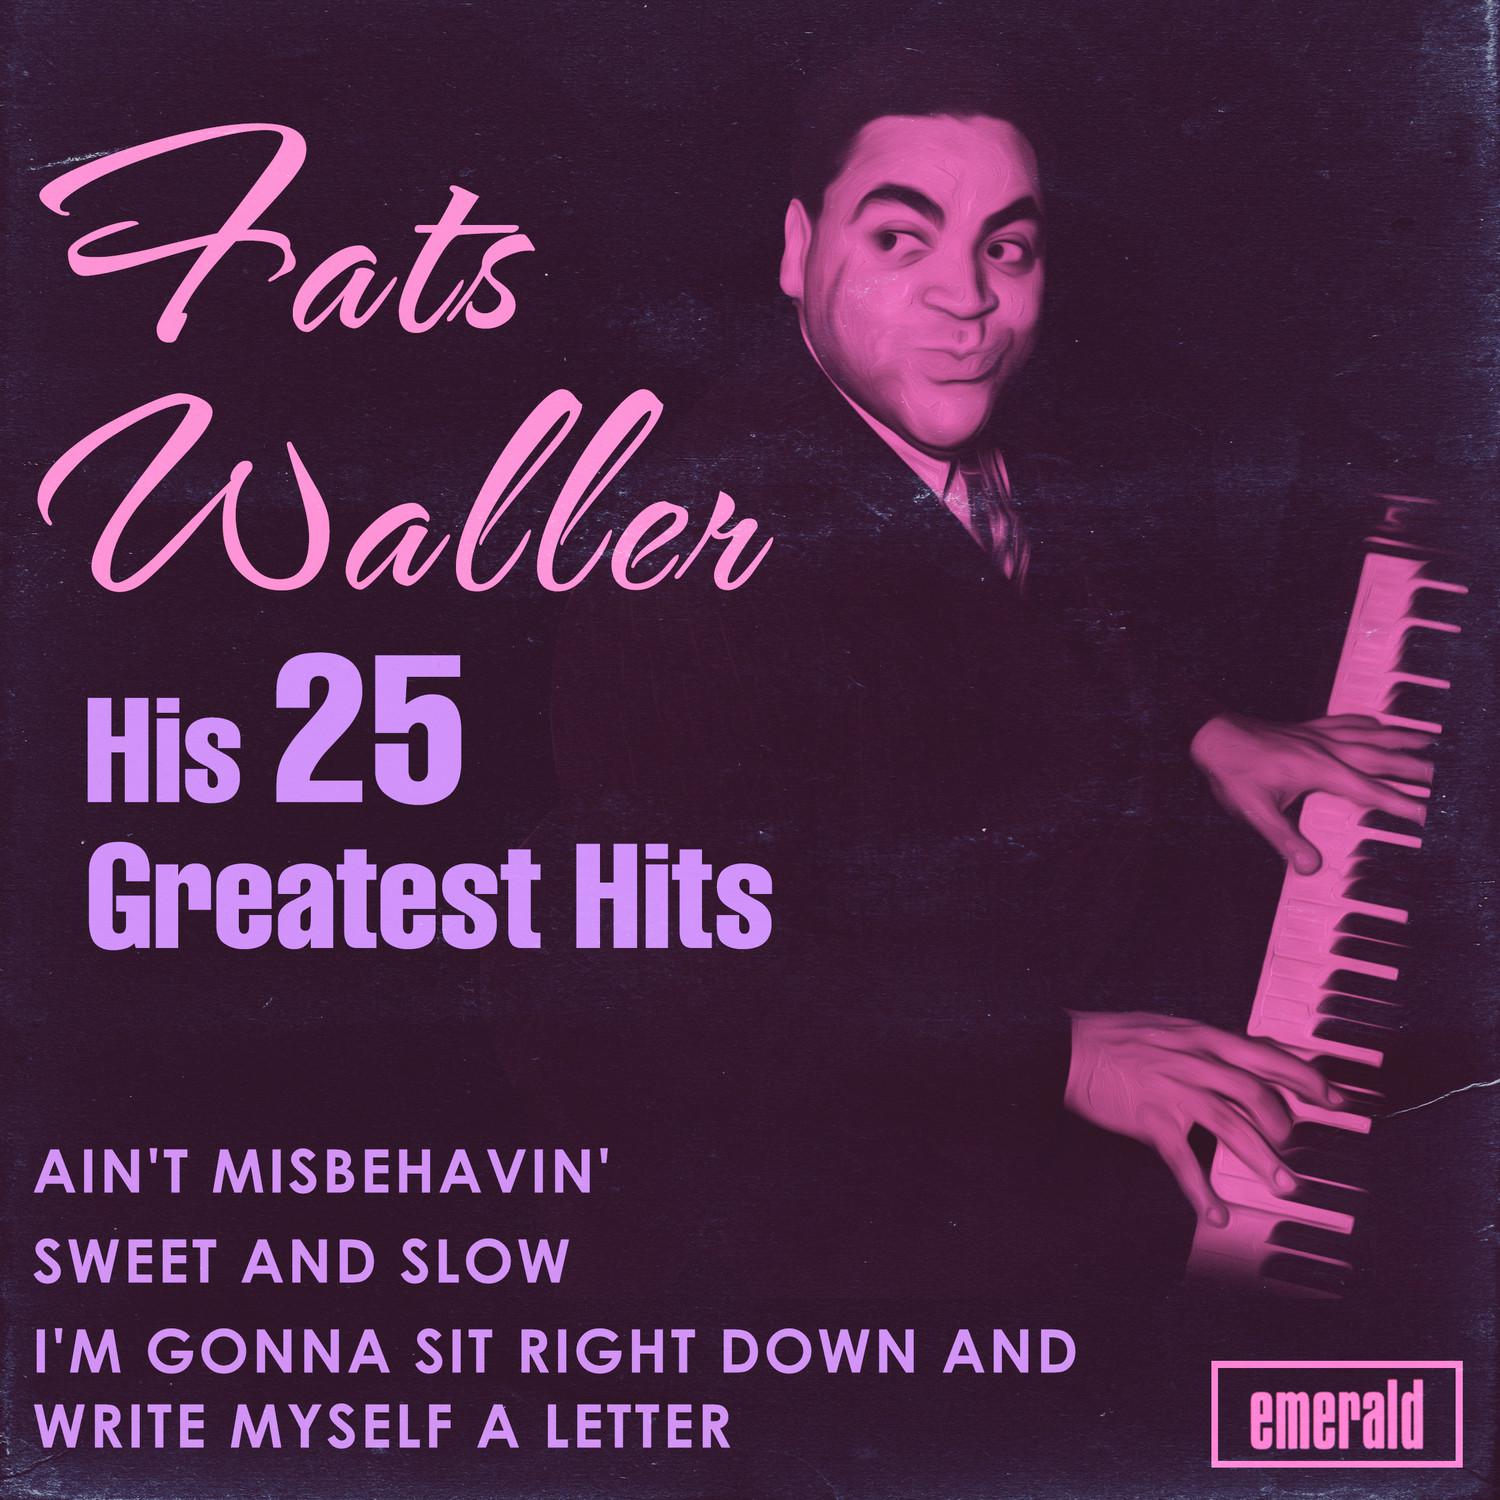 His 25 Greatest Hits